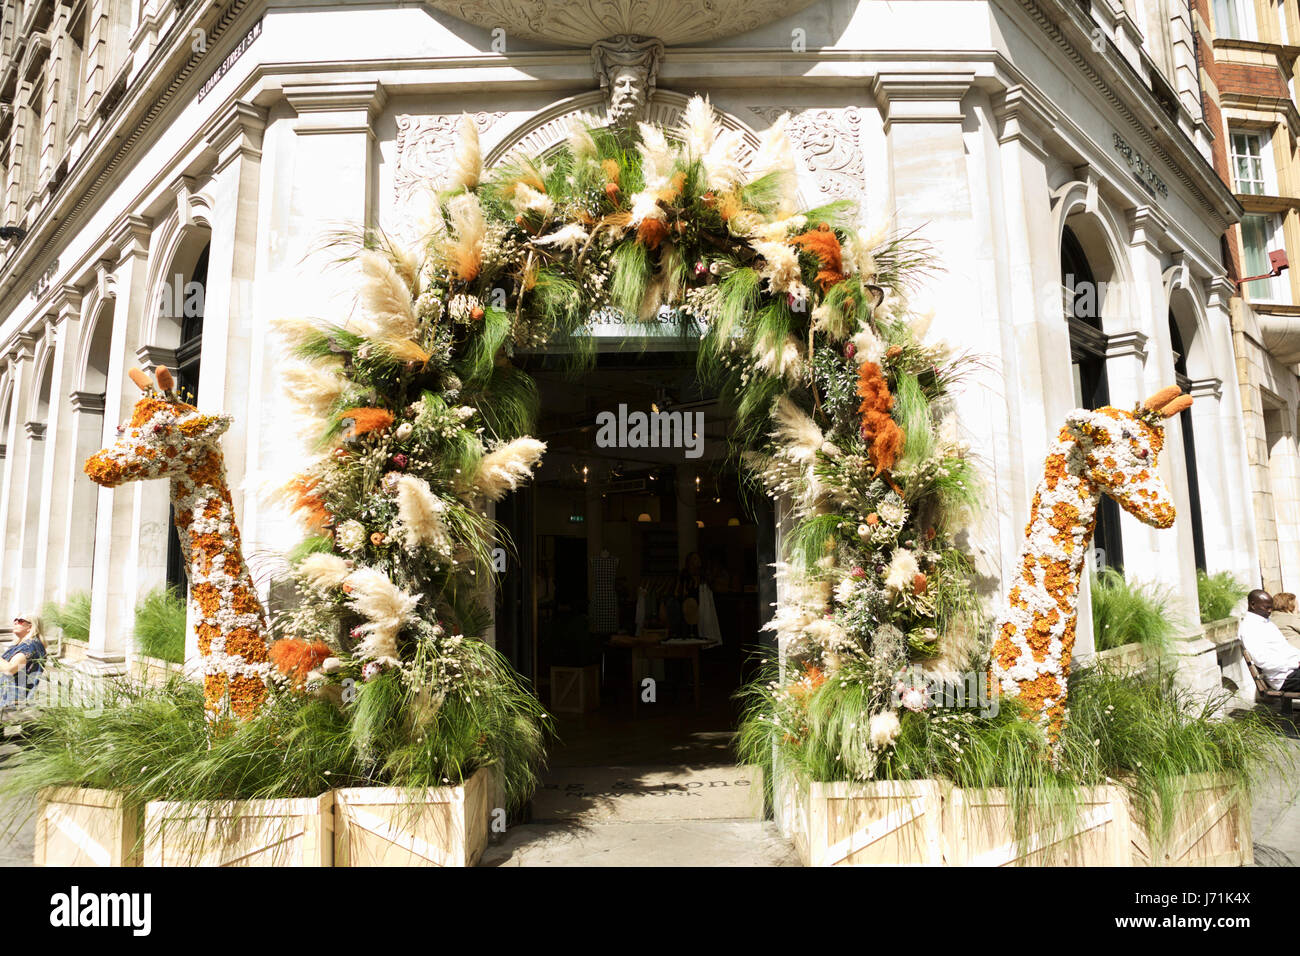 Chelsea in Bloom, London, UK. 22nd May, 2017. The Chelsea in Bloom Floral Safari is a display of life size animals around the streets of Chelsea - Kings Road and Sloan Square. Many of the retail shops are also taking part in Chelsea in Bloom by having spectacular shop front flower displays. Credit: Tony Farrugia/Alamy Live News Stock Photo